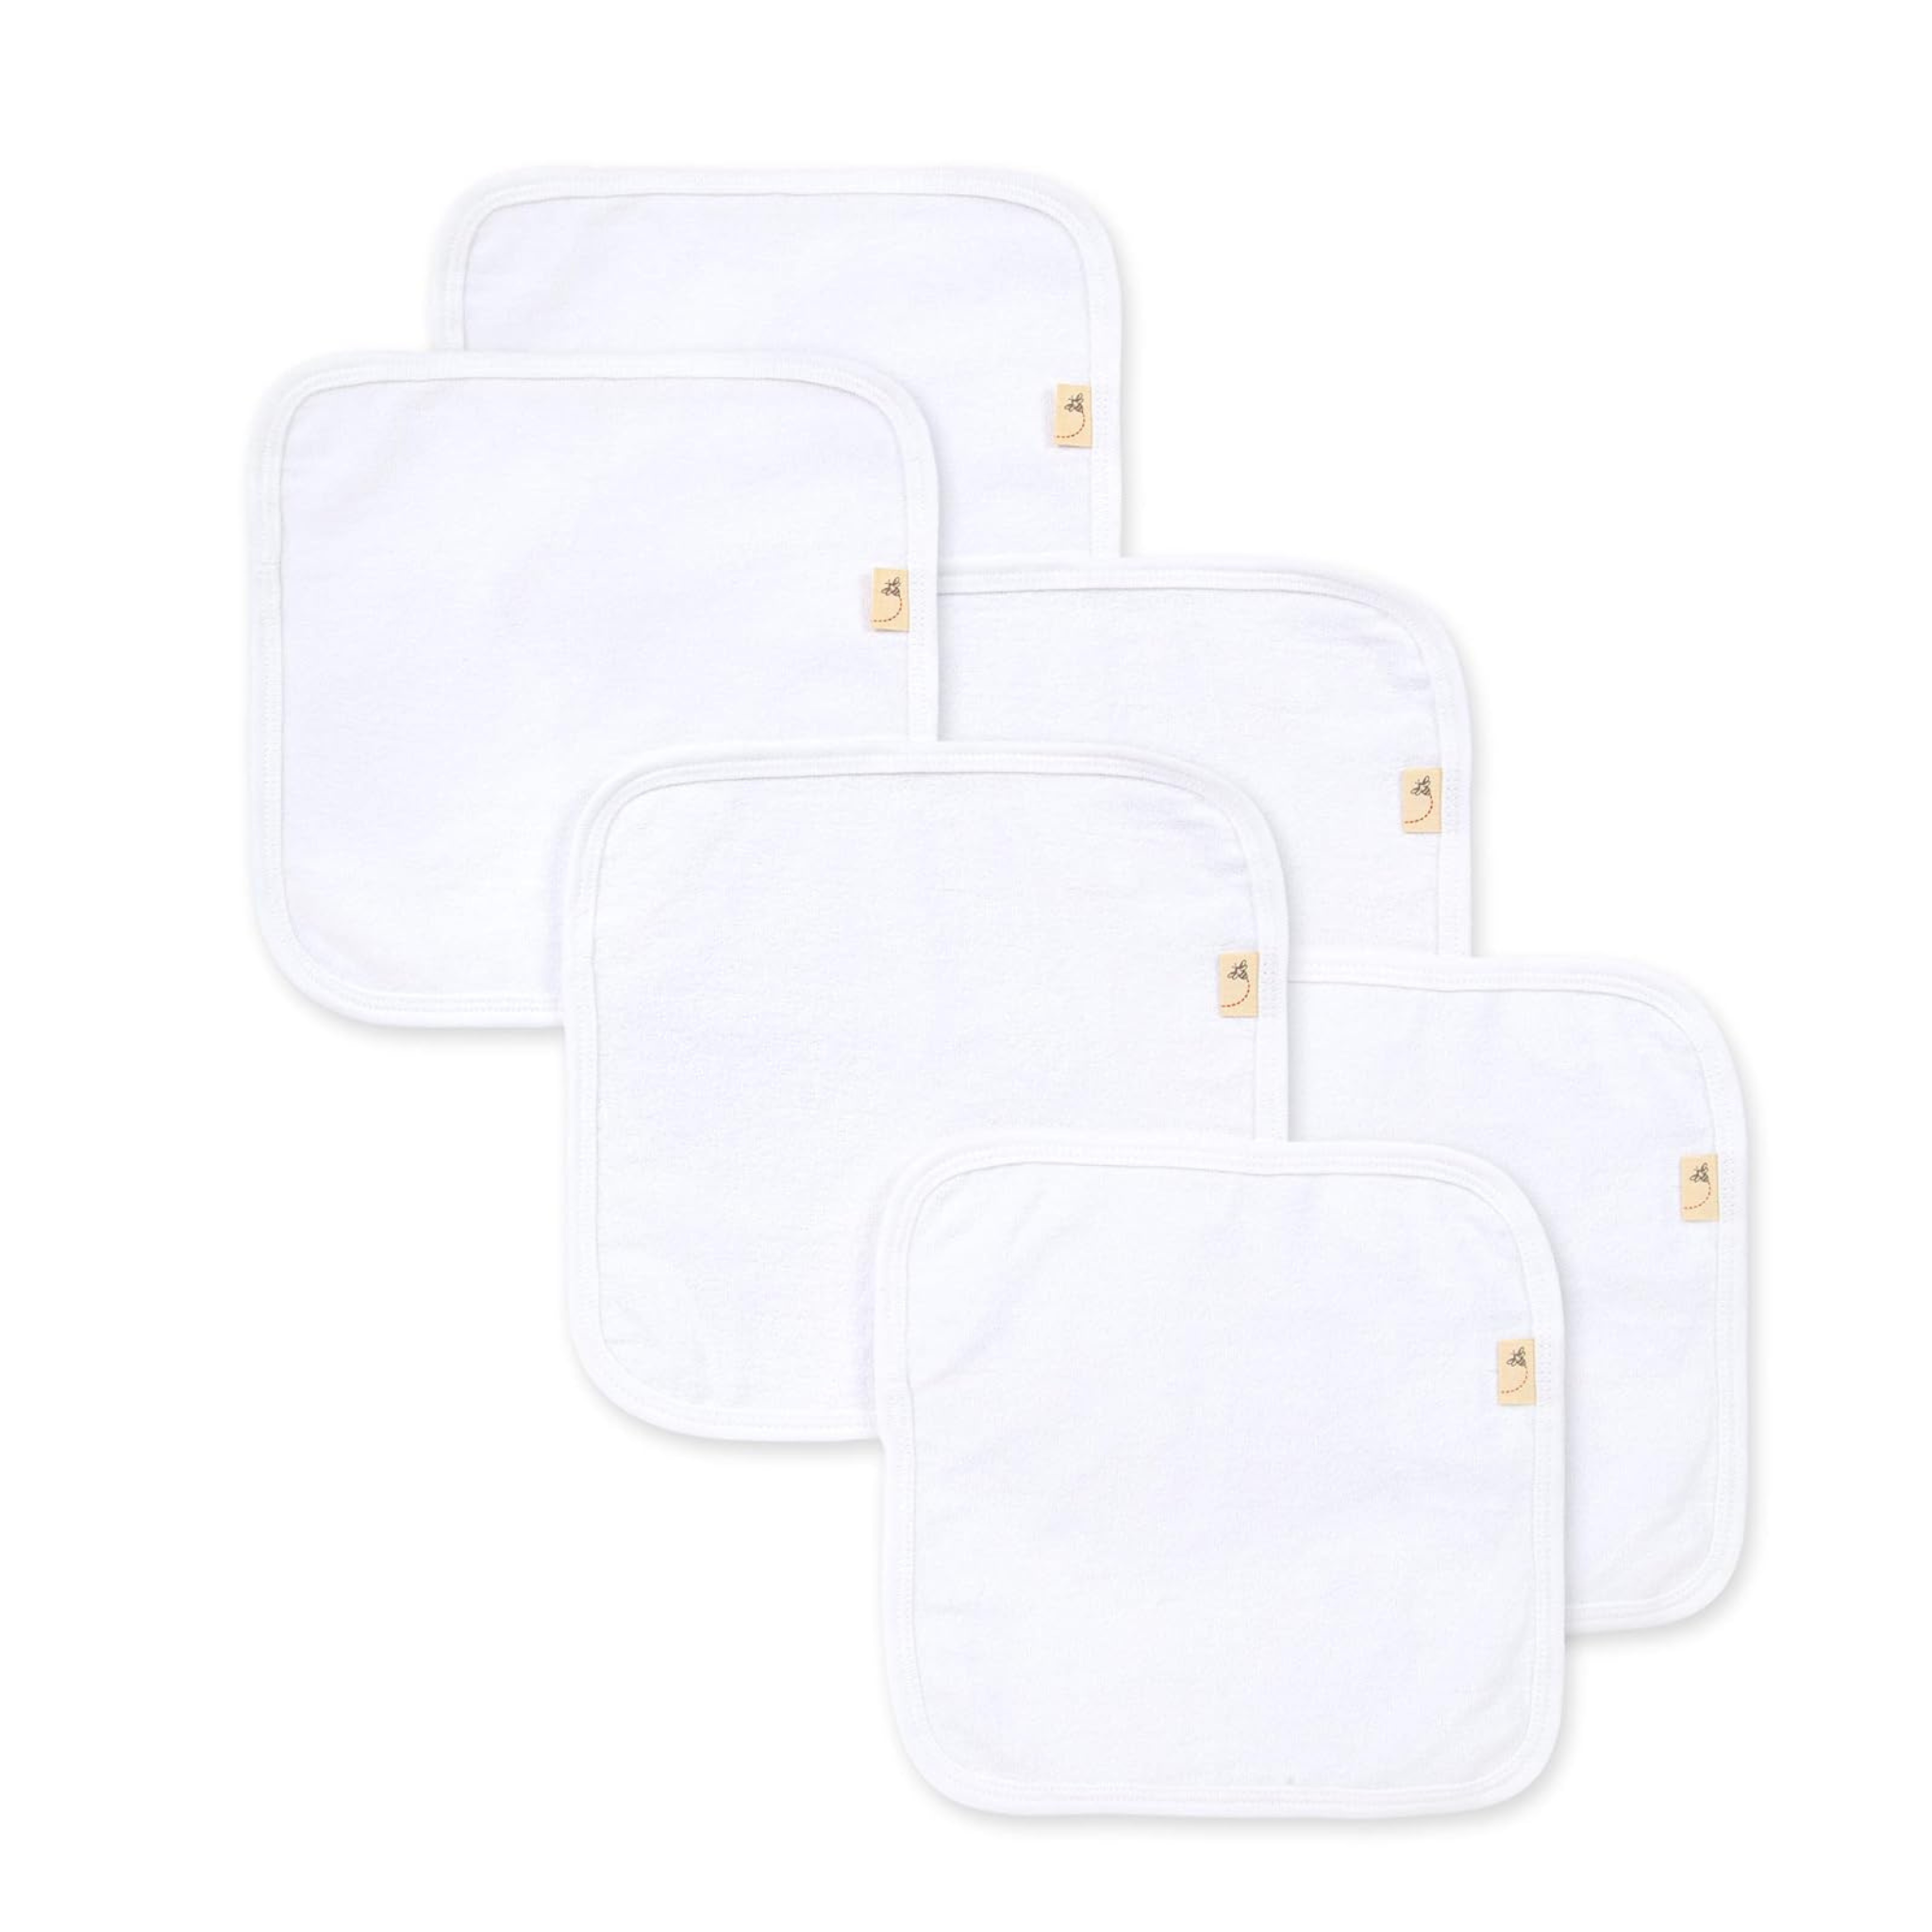 6-Pack Burts Bees Baby Infant Washcloths